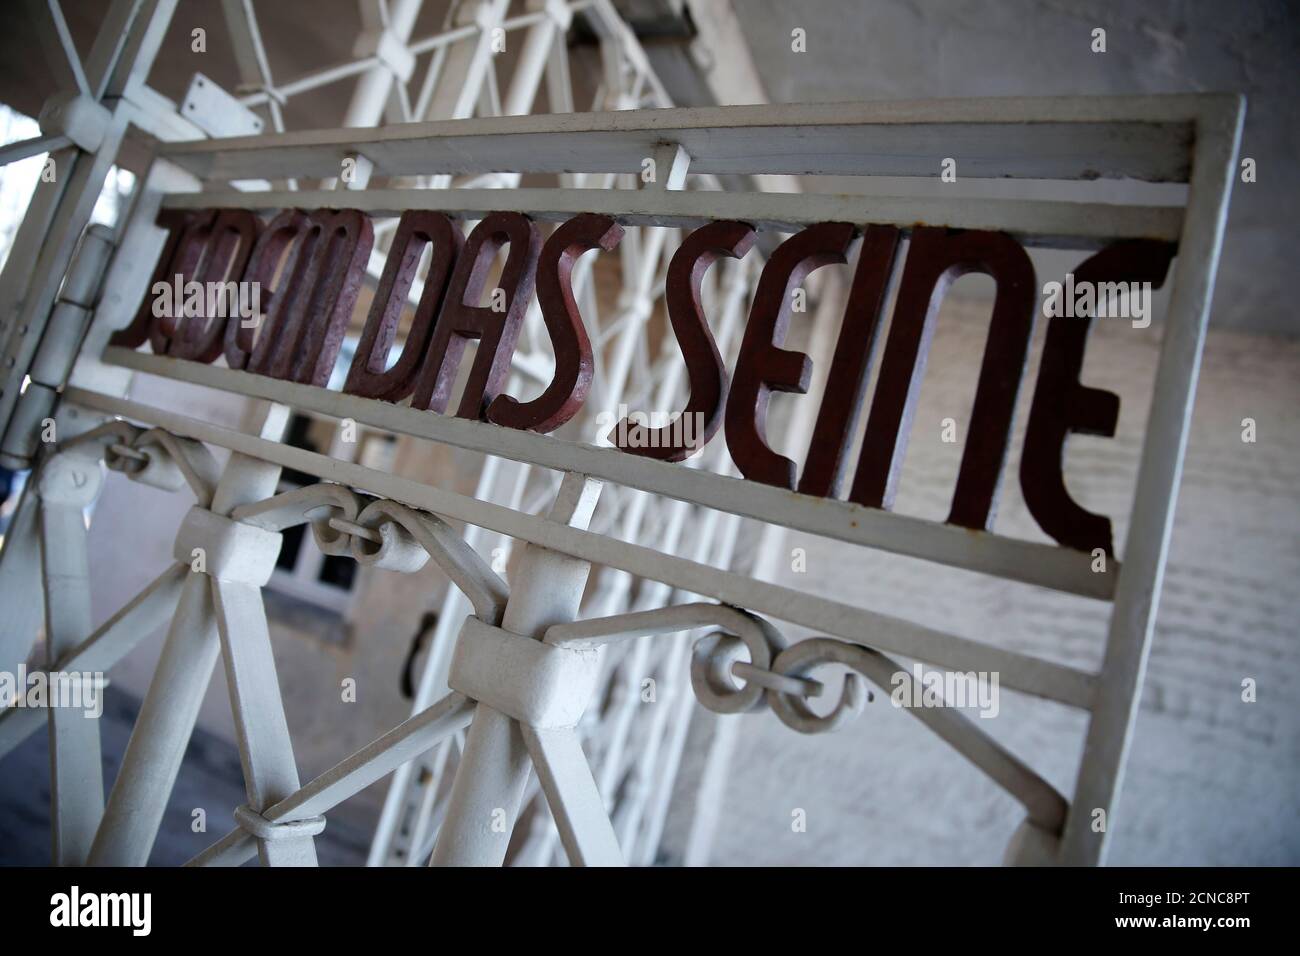 The Slogan Jedem Das Seine Meaning Each To His Own At The Internal Side Of The Main Gate Is Pictured At The Former Nazi Concentration Camp Buchenwald Near Weimar Germany January 27